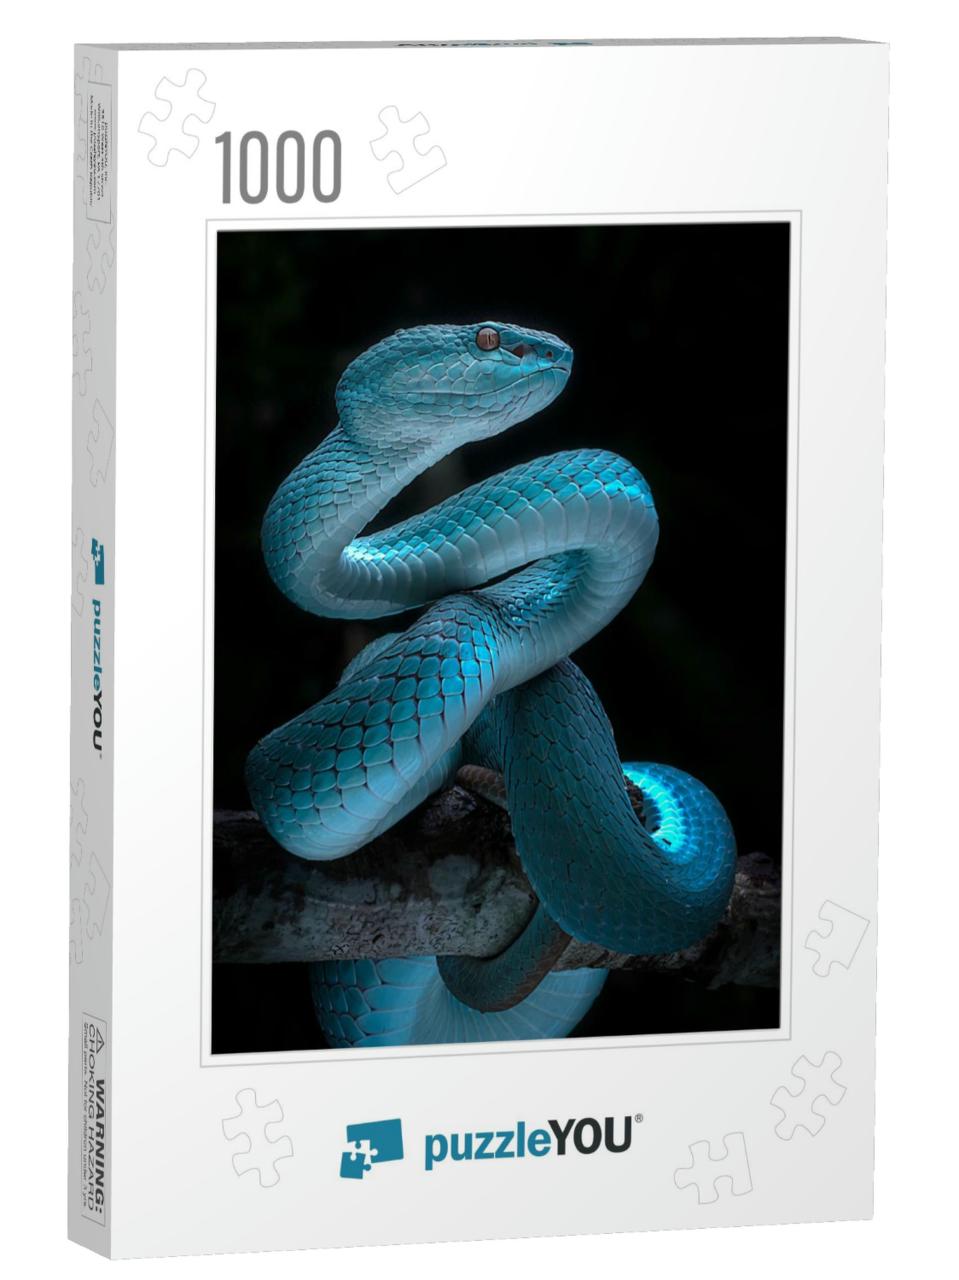 Venomous Viper Snake - Reptile/Snake Photo Series... Jigsaw Puzzle with 1000 pieces